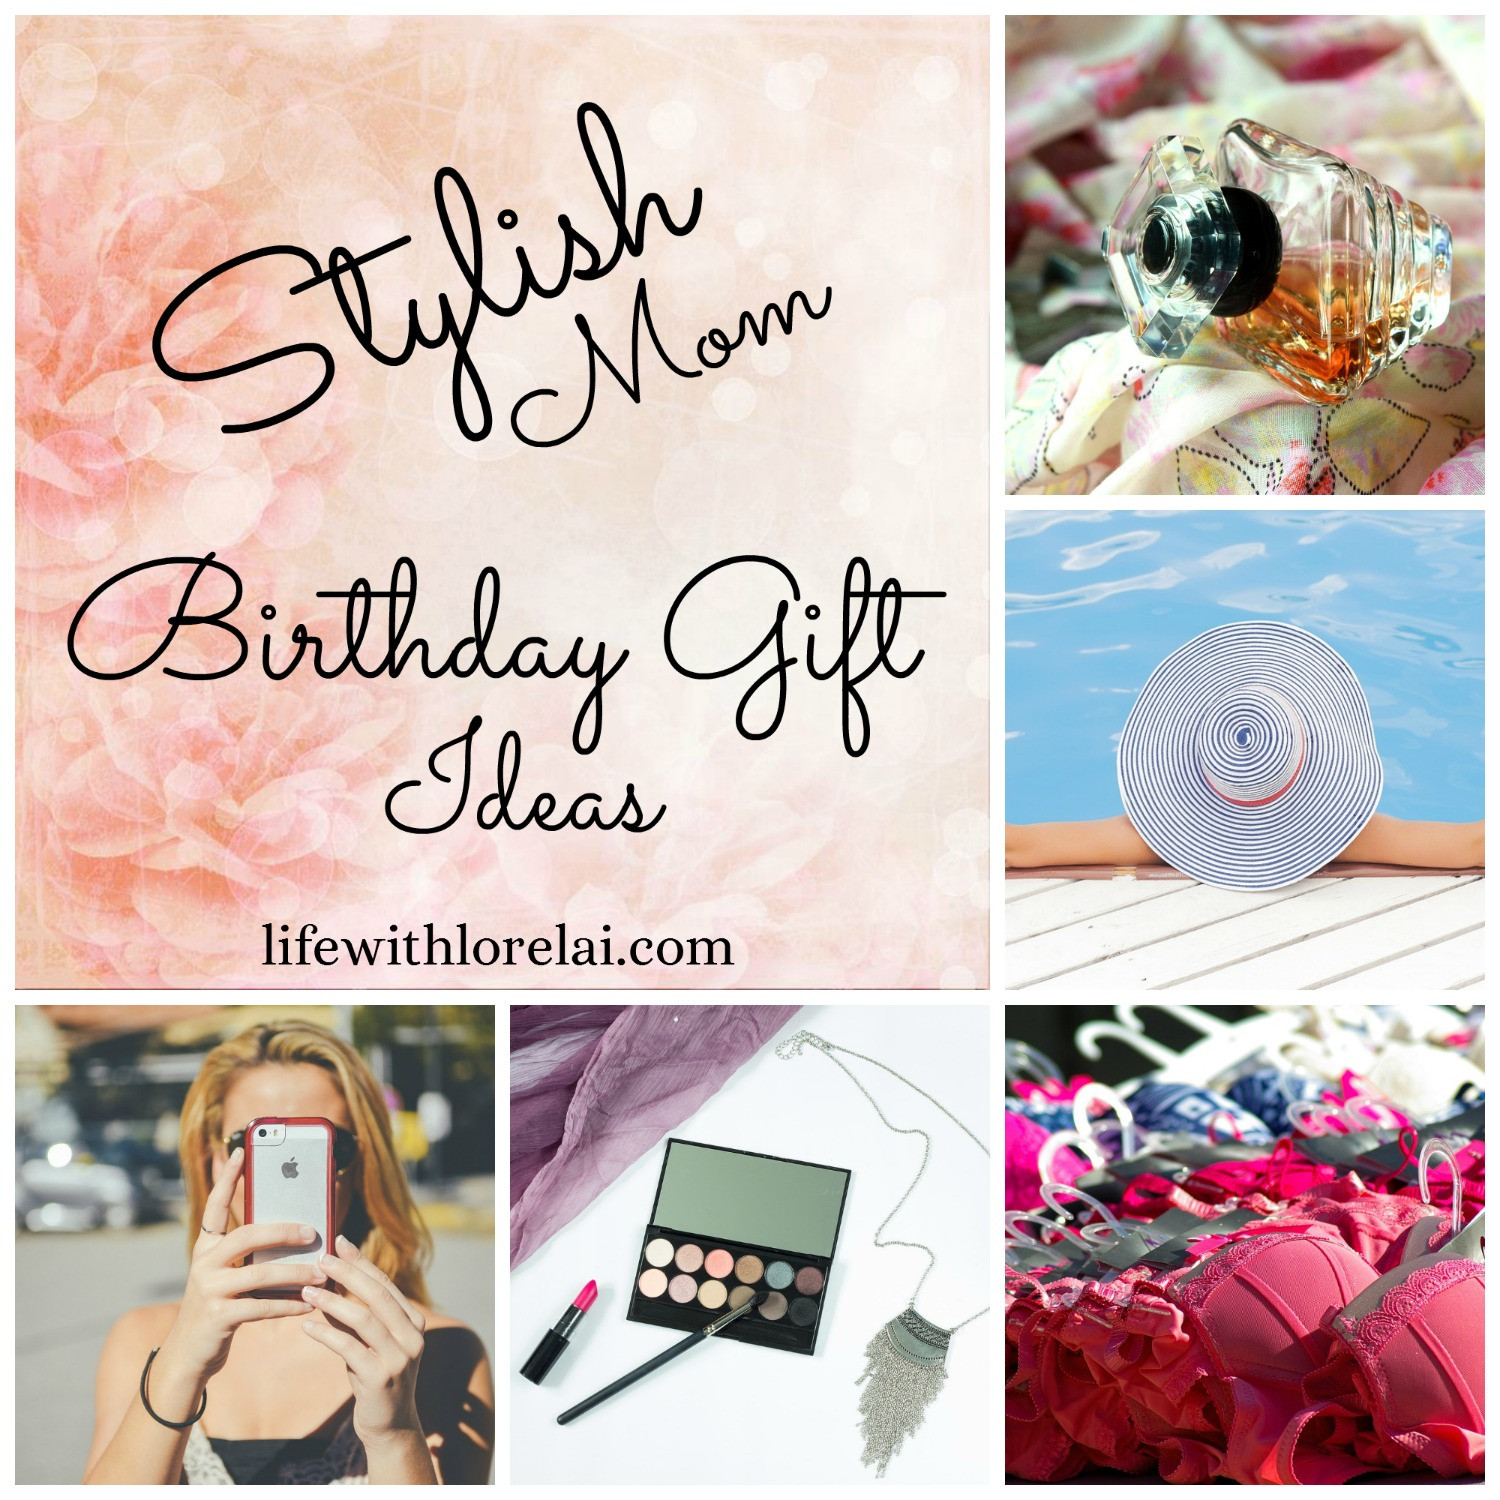 Birthday Gift Ideas For Moms
 Birthday Gift Ideas For The Stylish Mom Life With Lorelai